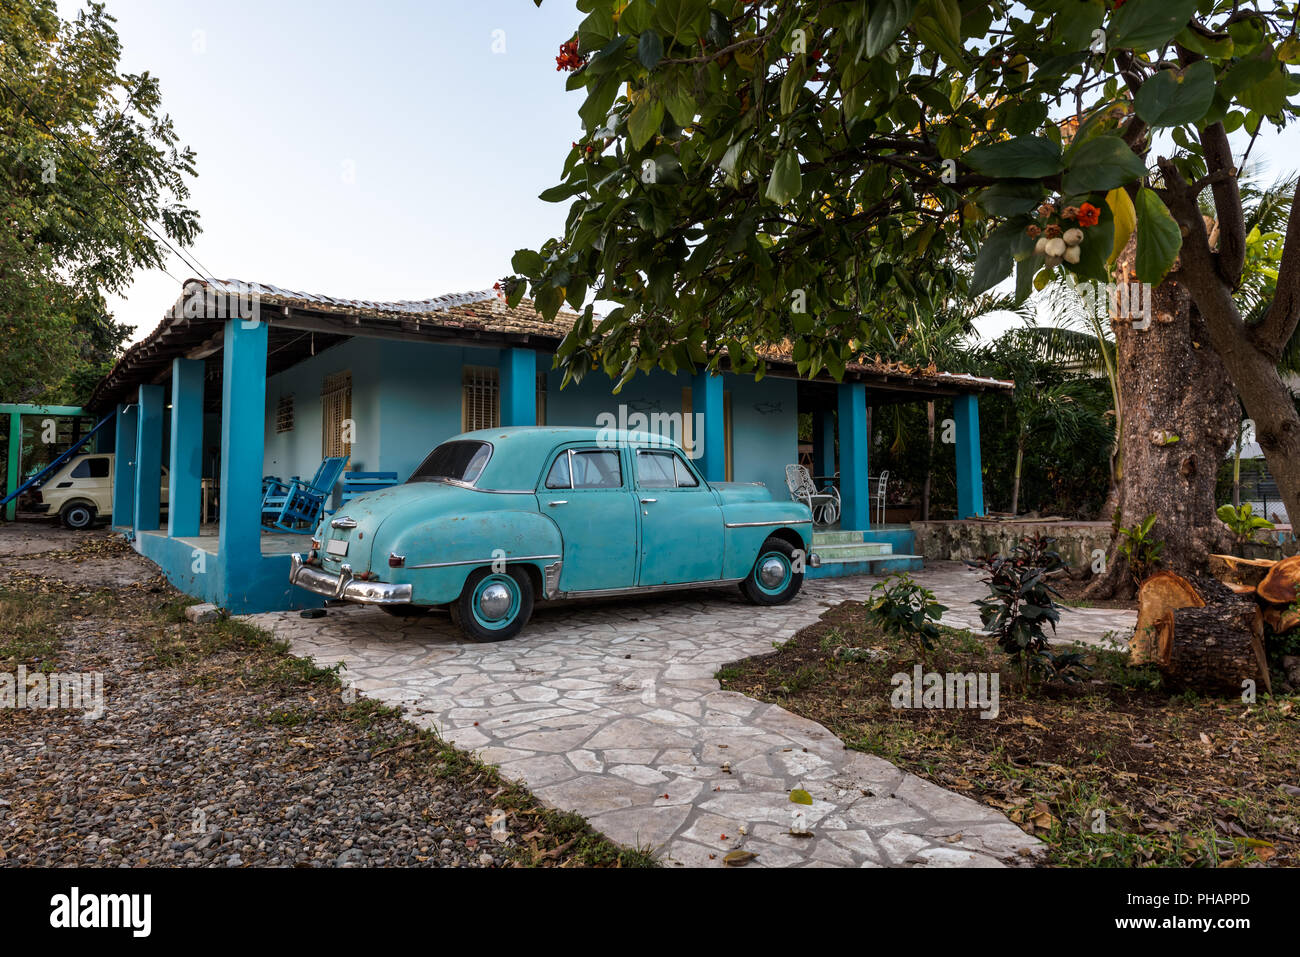 Vintage blue car in front of typical Cuban house in Trinidad, Cuba. Stock Photo